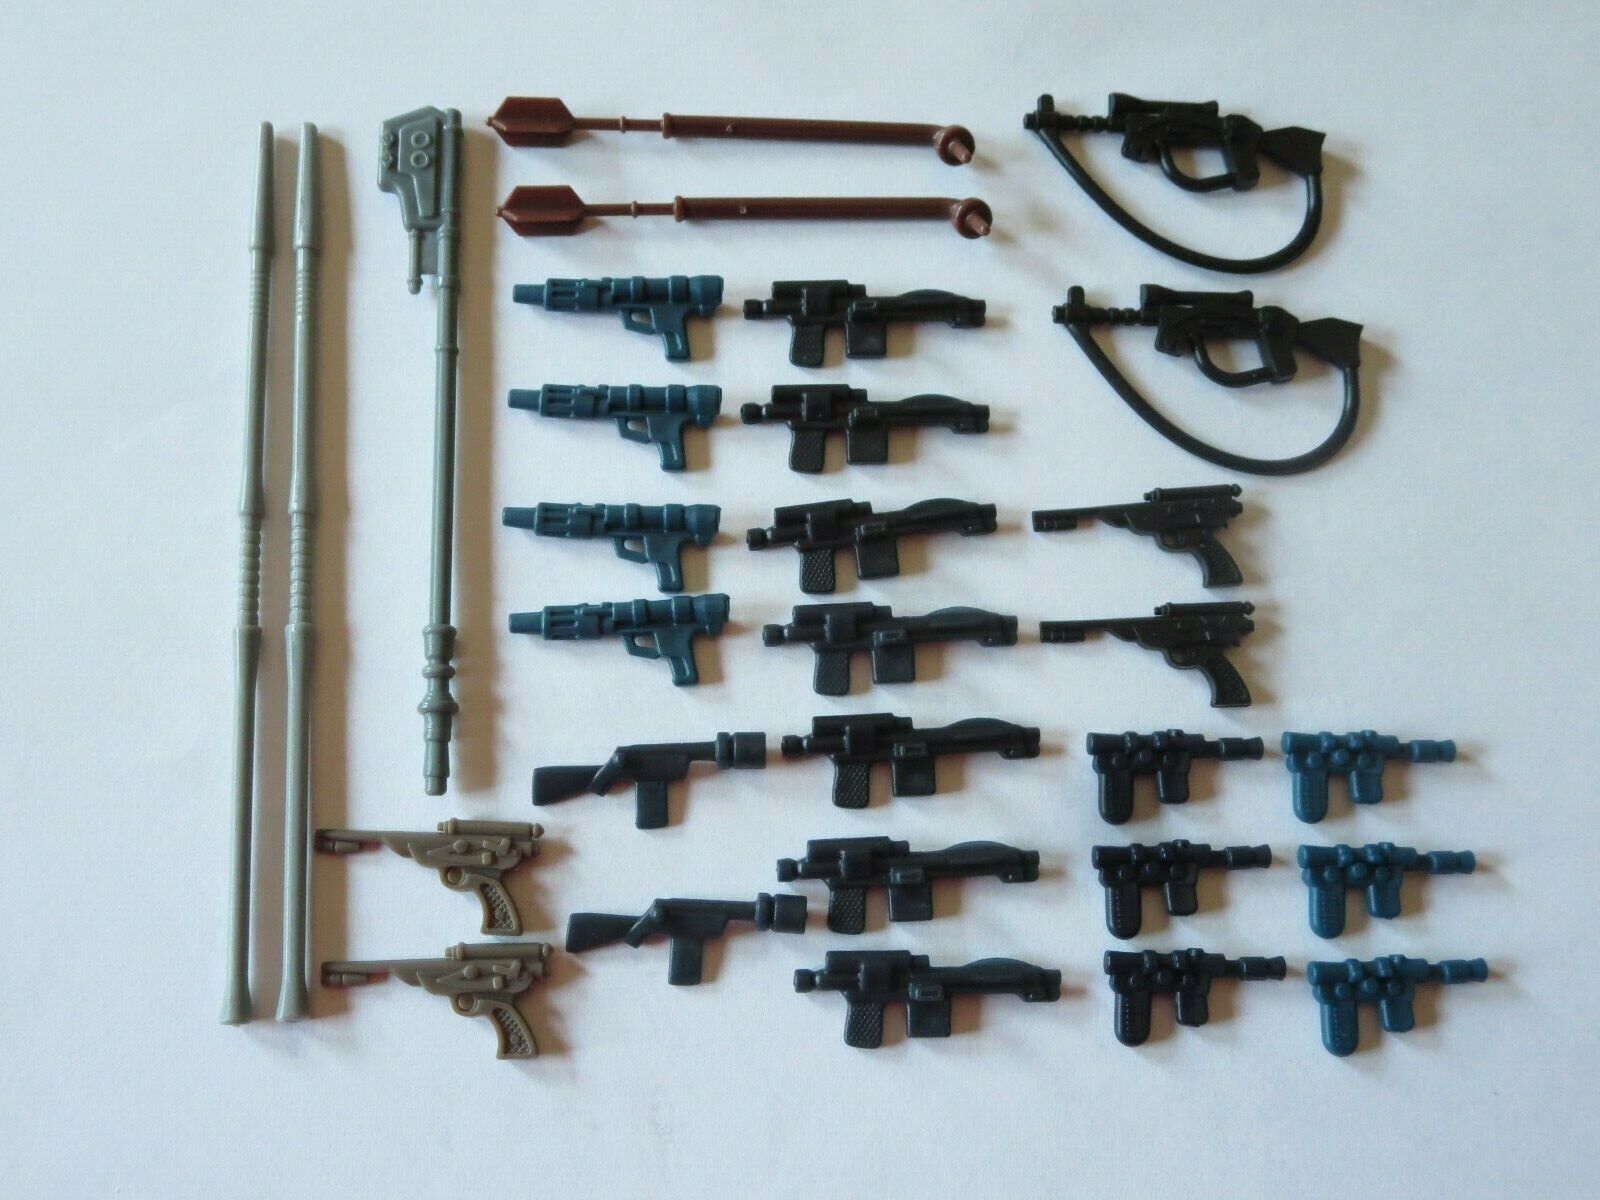 30 Repro Weapons Lot VERY CLOSE Star Wars LOT